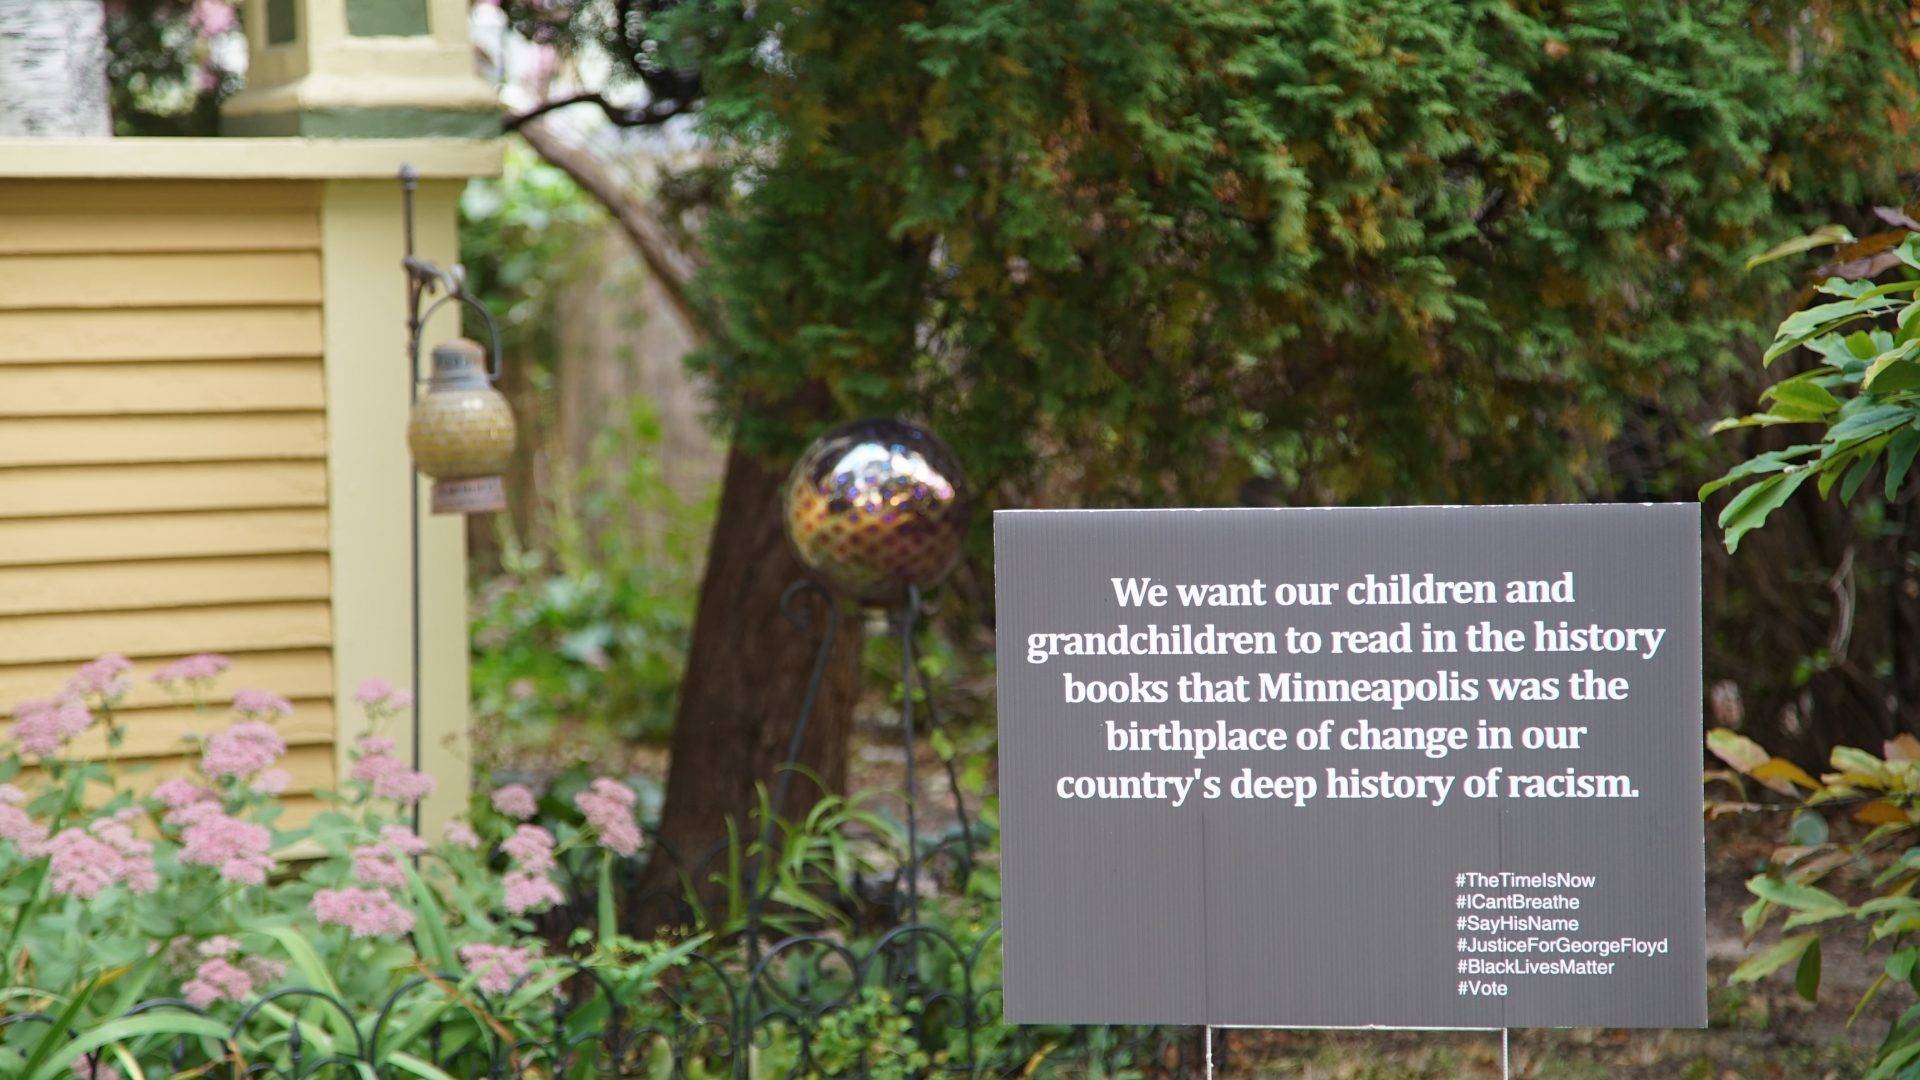 A yard sign supporting Black Lives Matter outside of a home in Minneapolis. It reads "We want our children and grandchildren to read in the history books that Minneapolis was the birthplace of change in our country's deep history of racism."